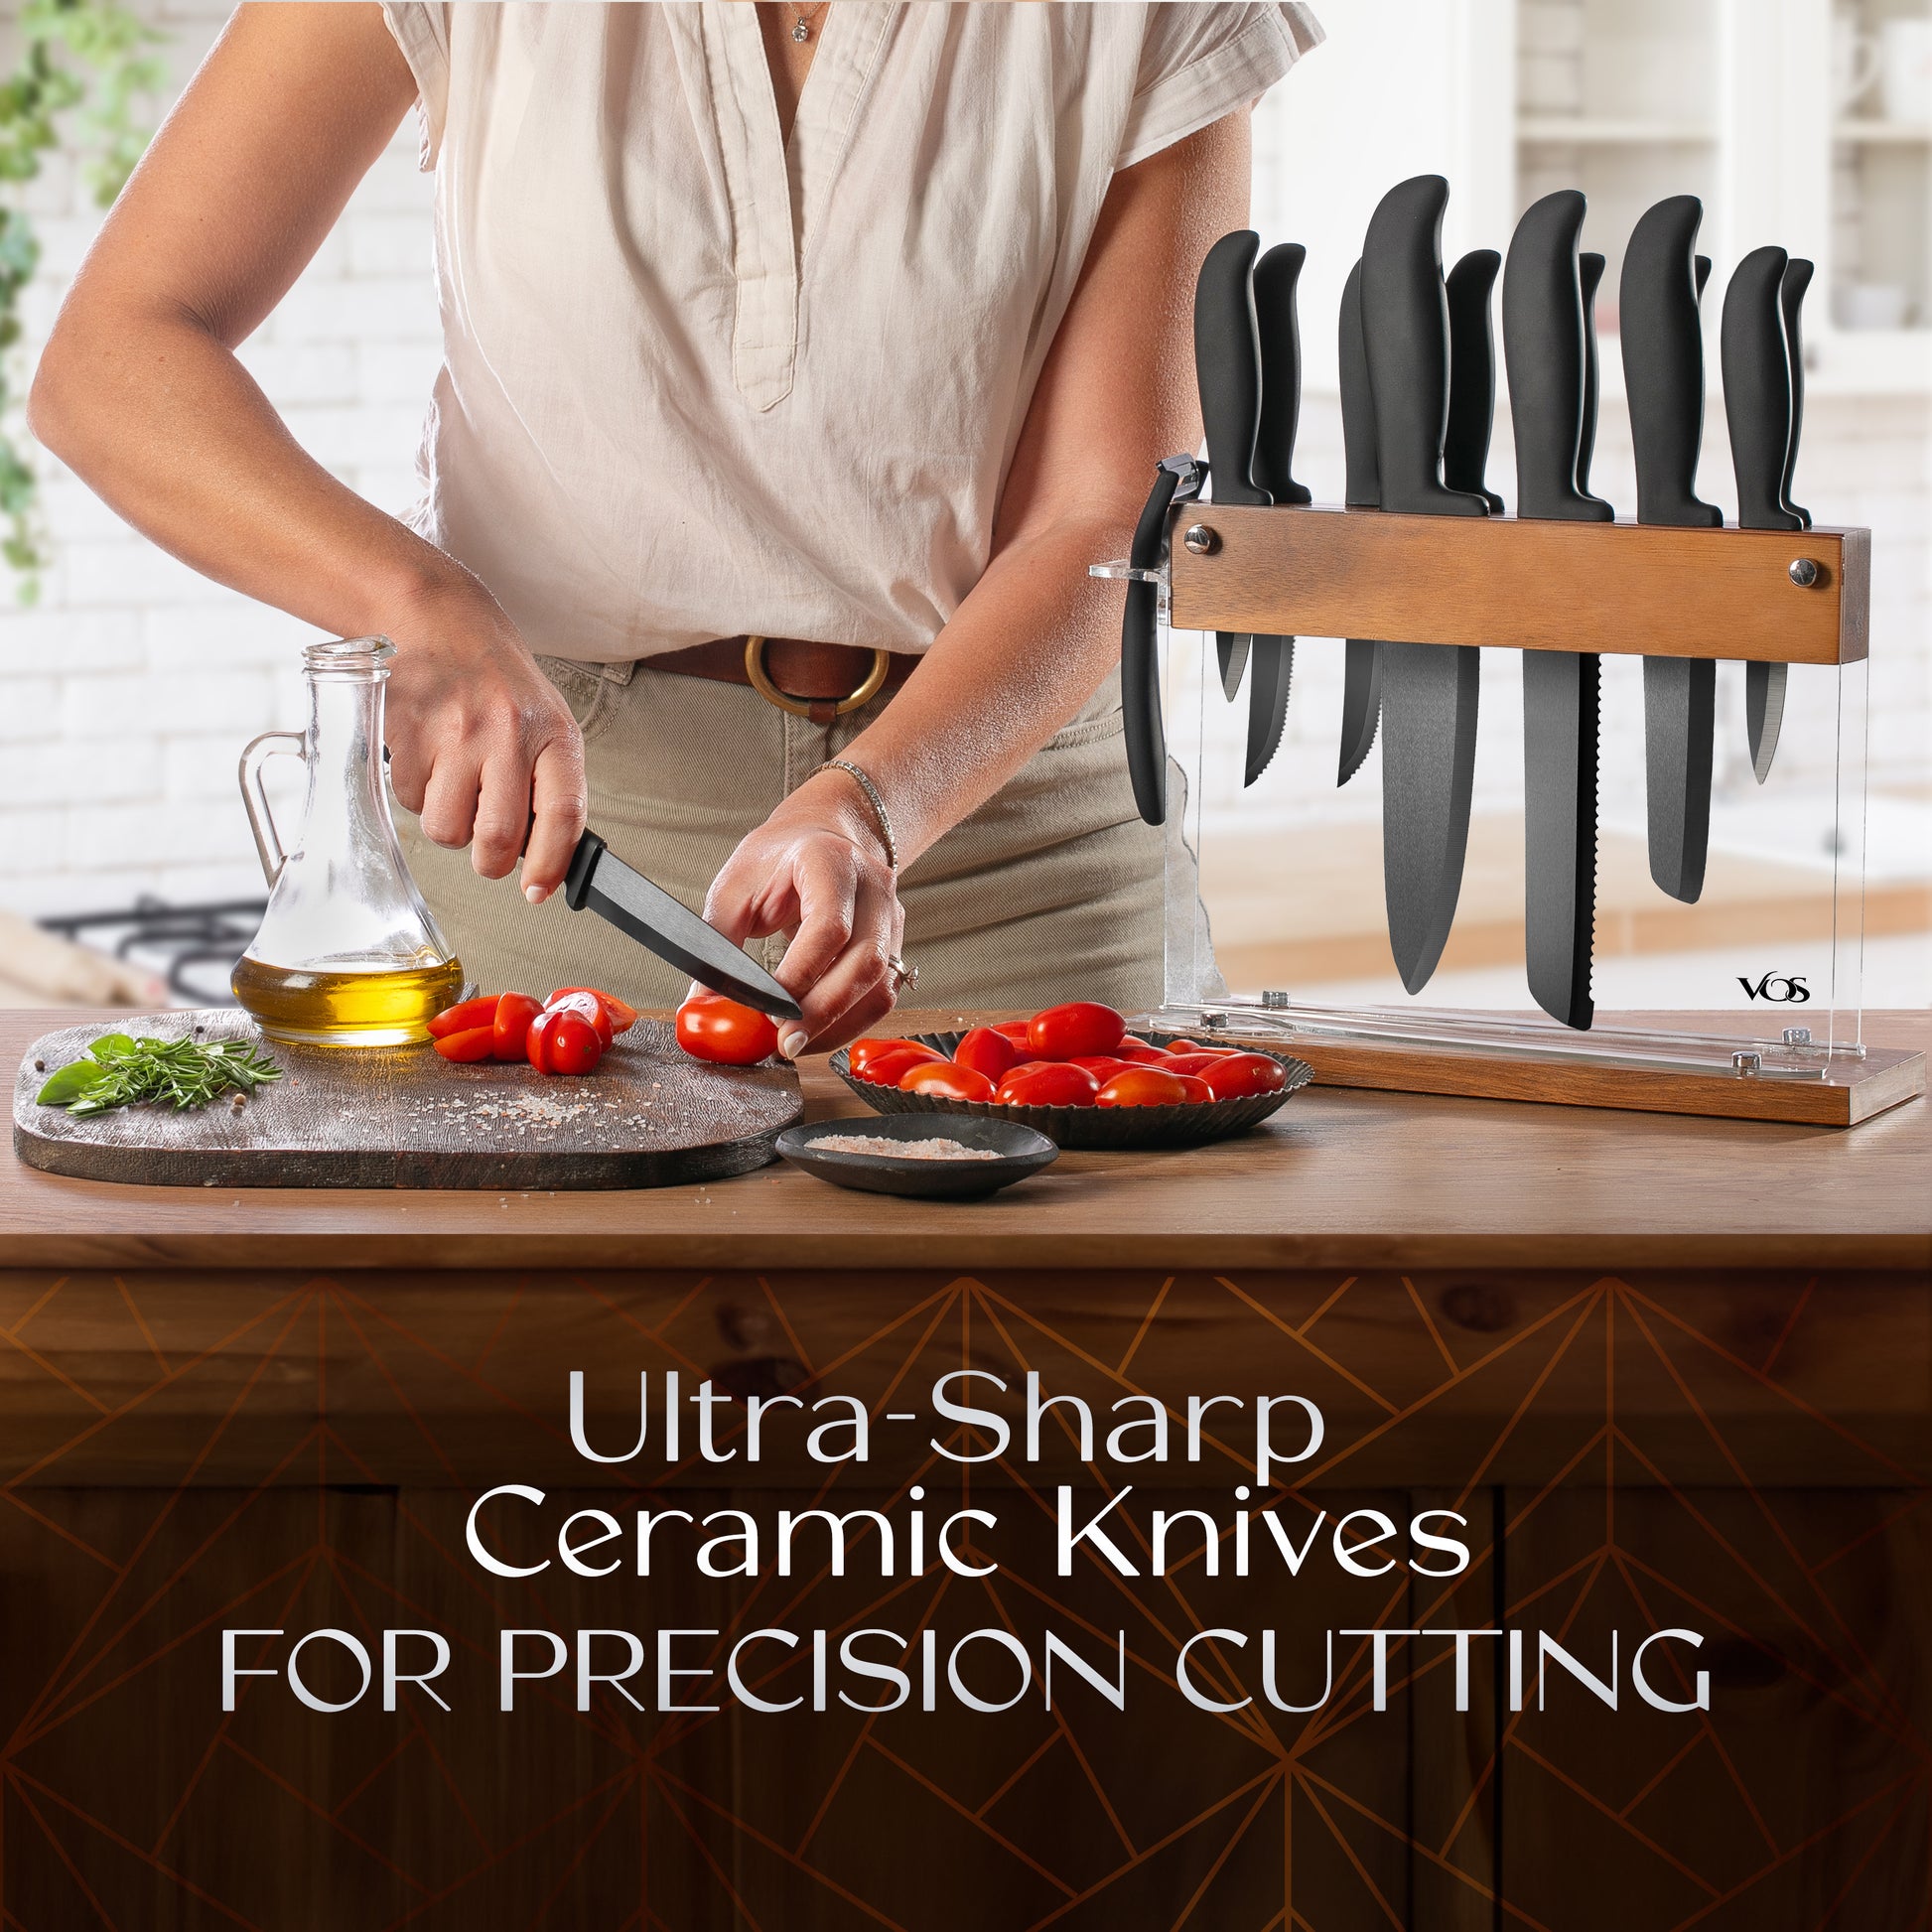 Stainless Steel Knife Set with Block - 13 Kitchen Knives Set Chef